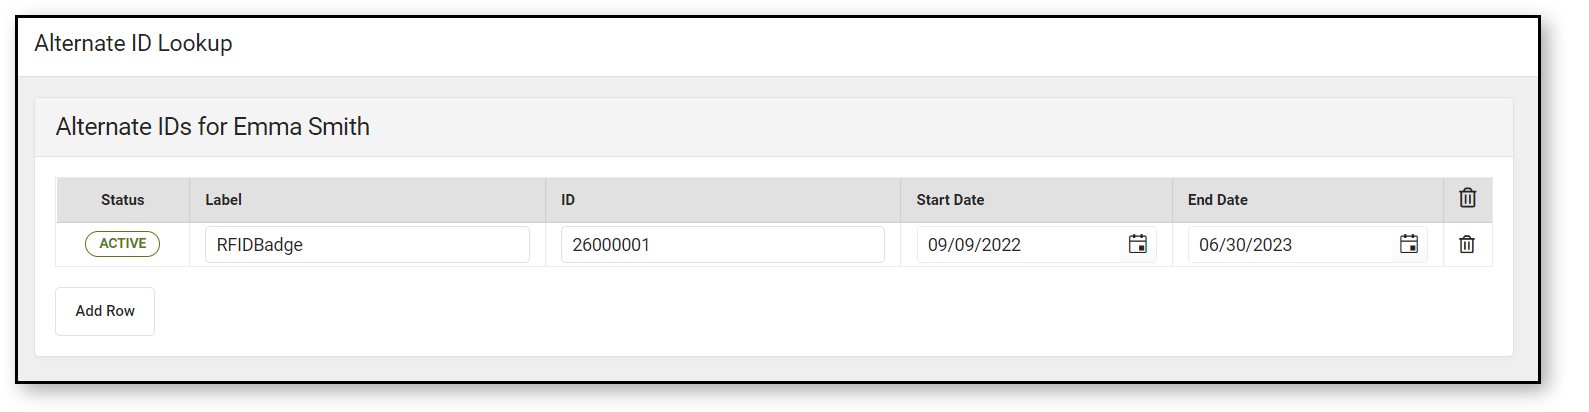 Screenshot of Alternate IDs for a student; showing status, the label, ID number, and start/end date for the ID.